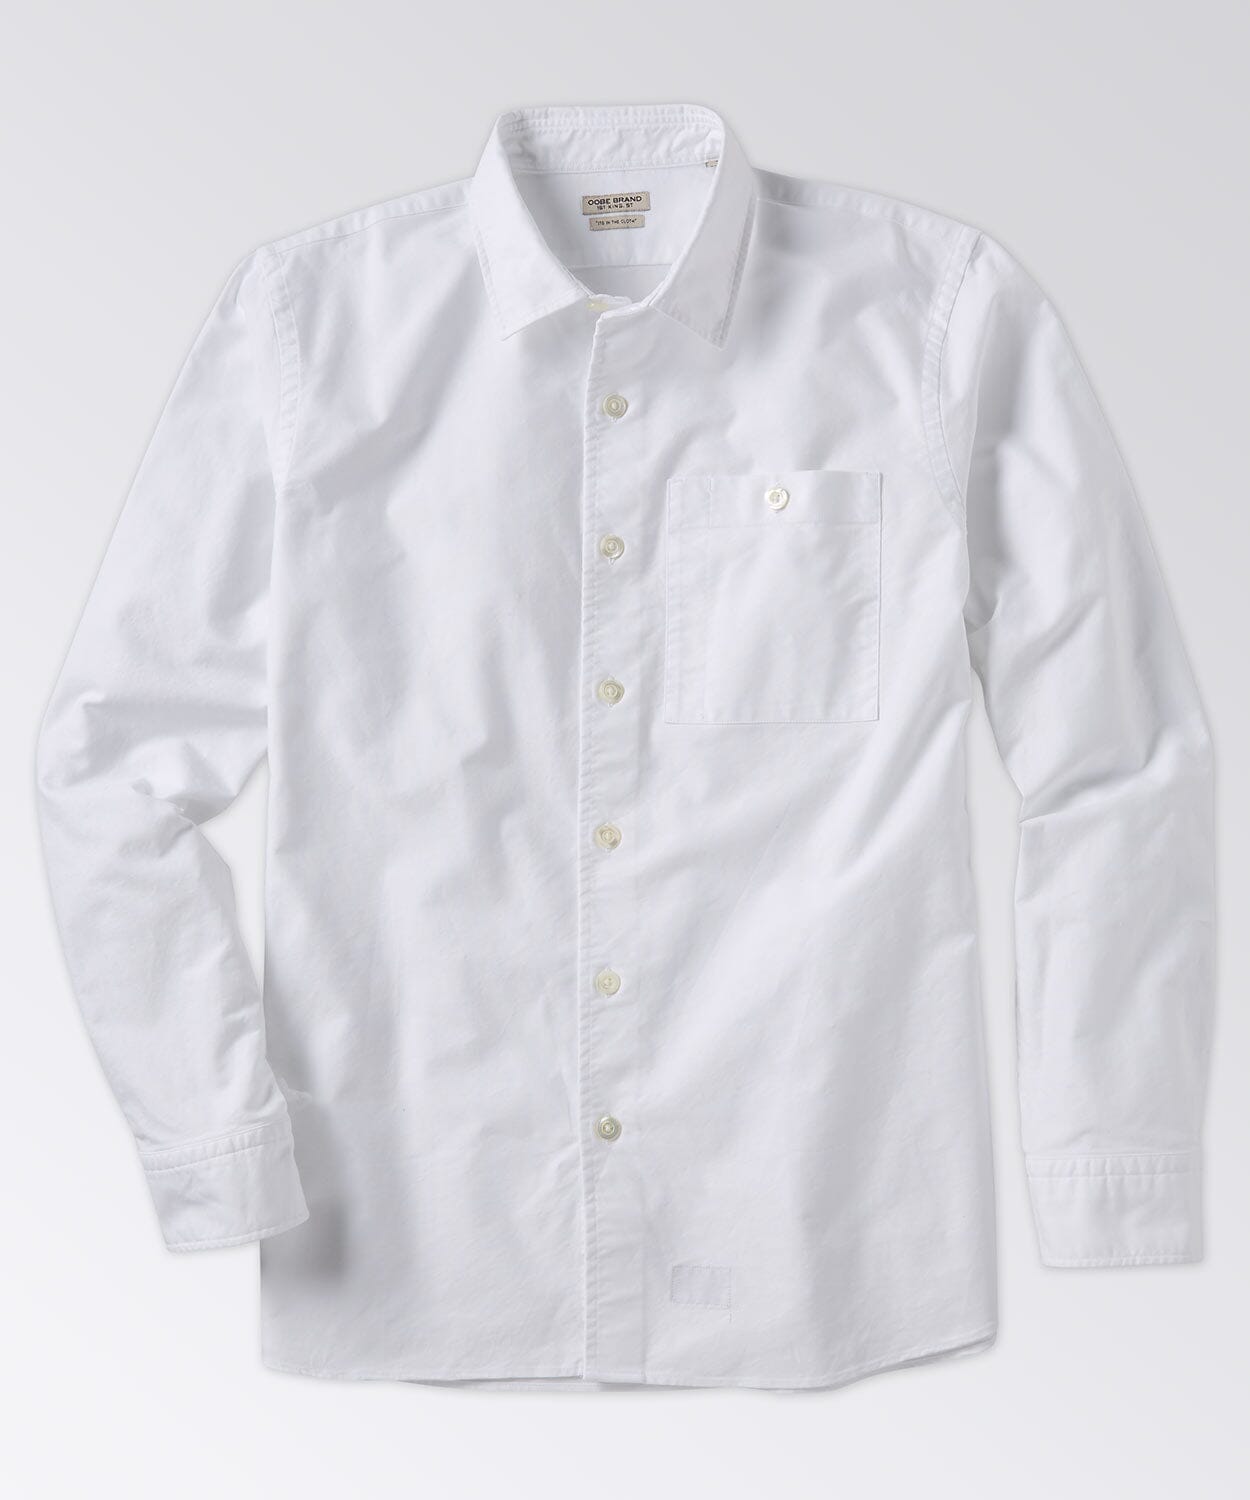 Aalto Oxford Shirt Button Downs OOBE BRAND Classic White S 